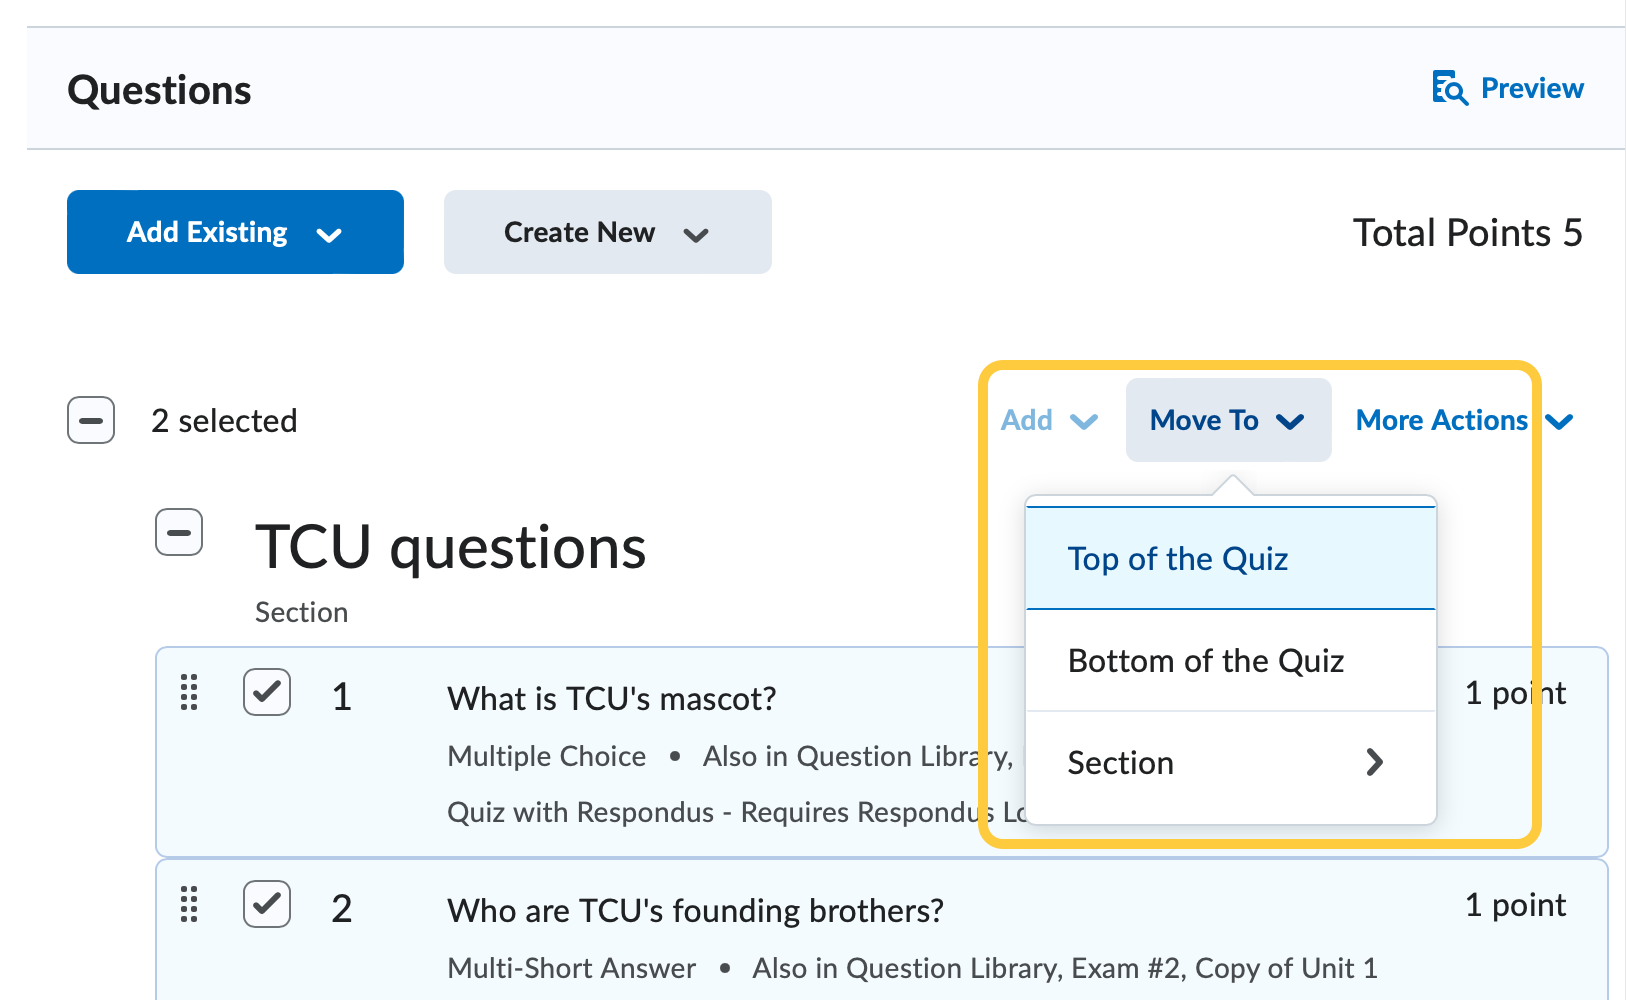 Move to Menu to Reorder Quiz Questions